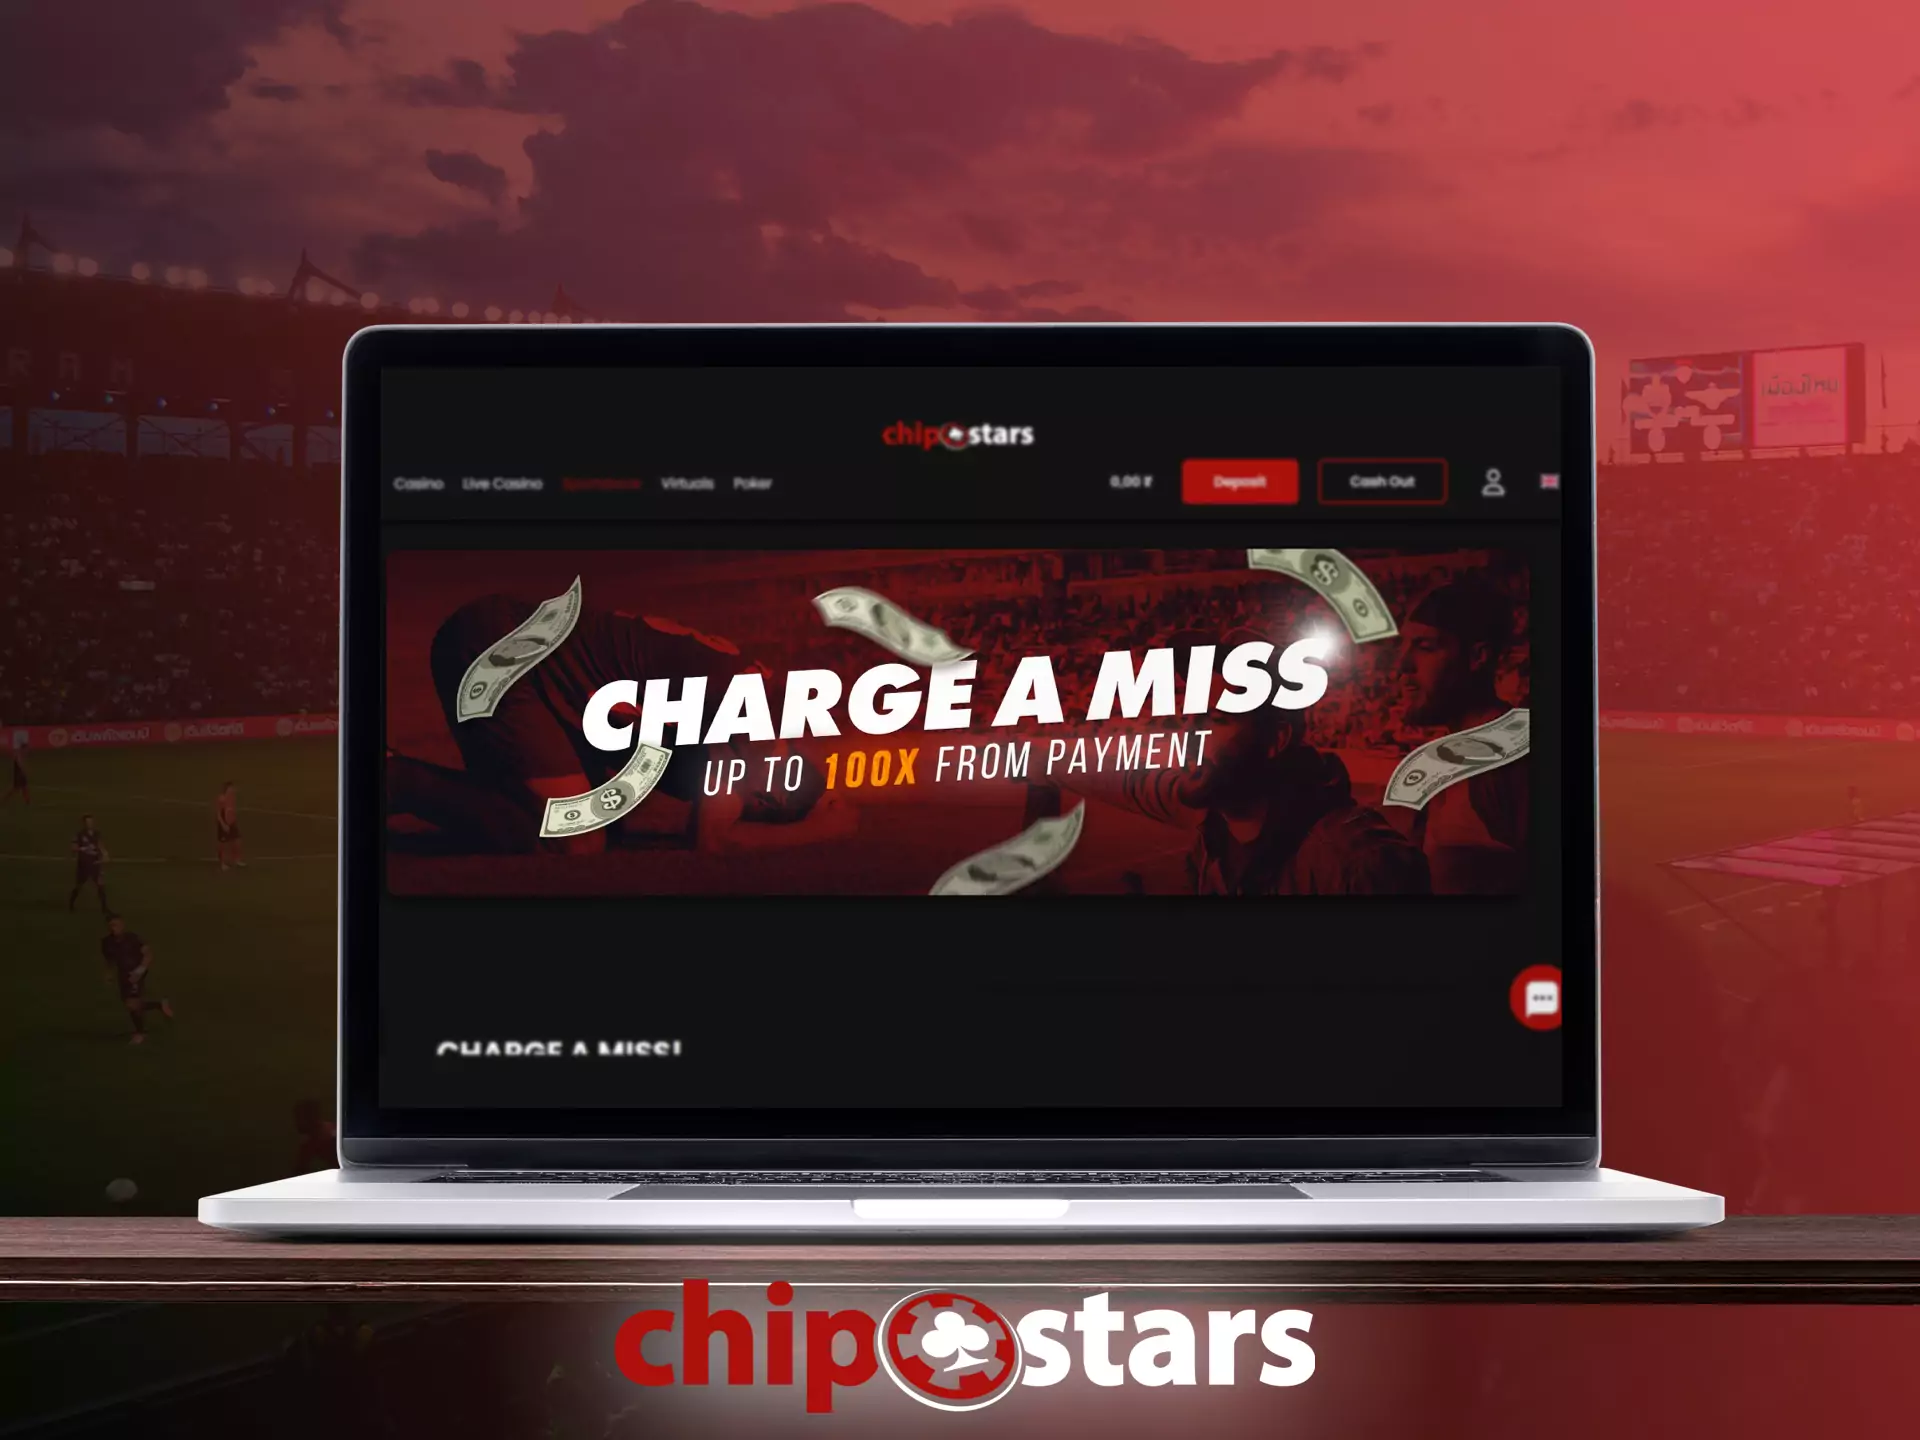 Check if you suit to conditions of getting the Charge bonus from Chipstars.